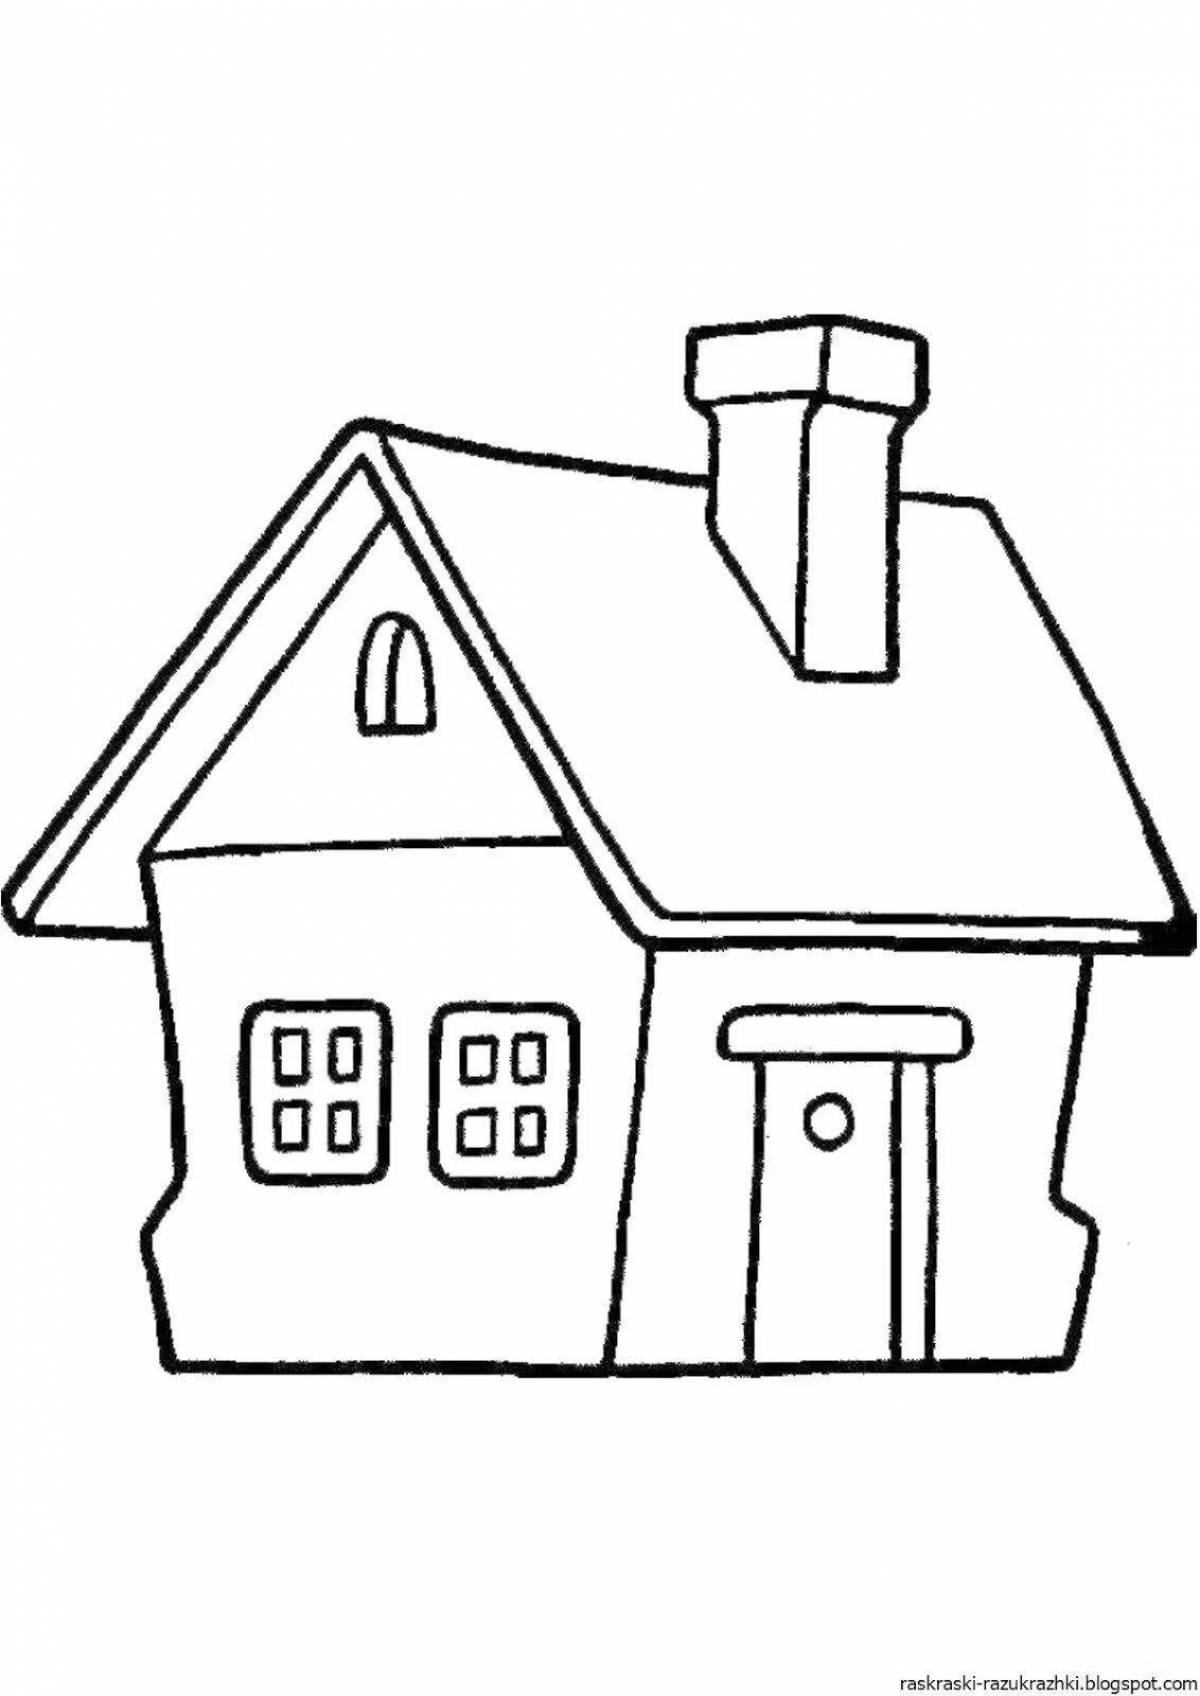 Coloring book magic simple house